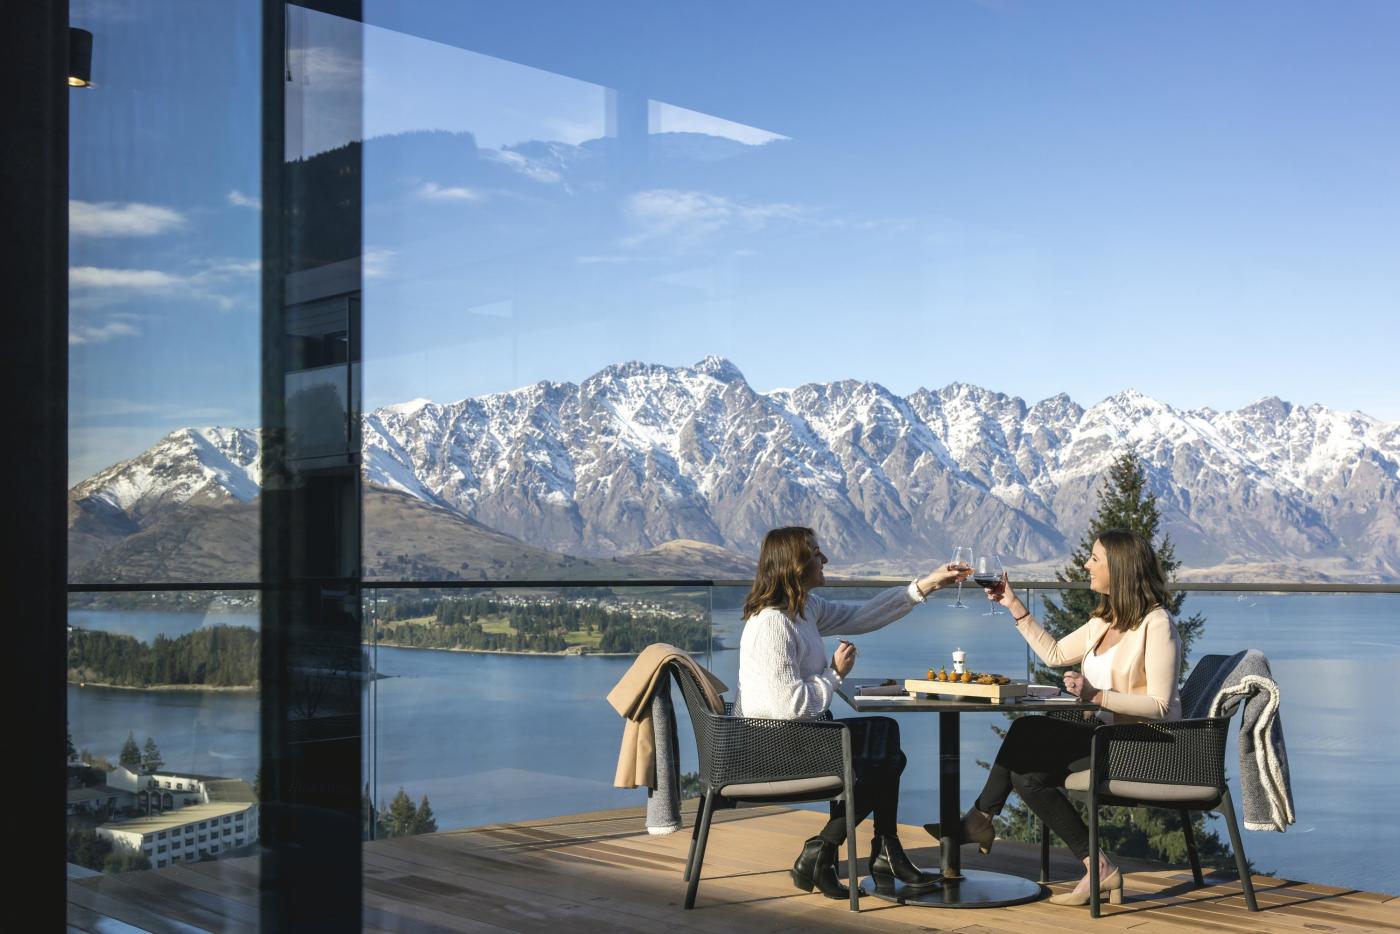 People dining outside with snow capped mountains in the background